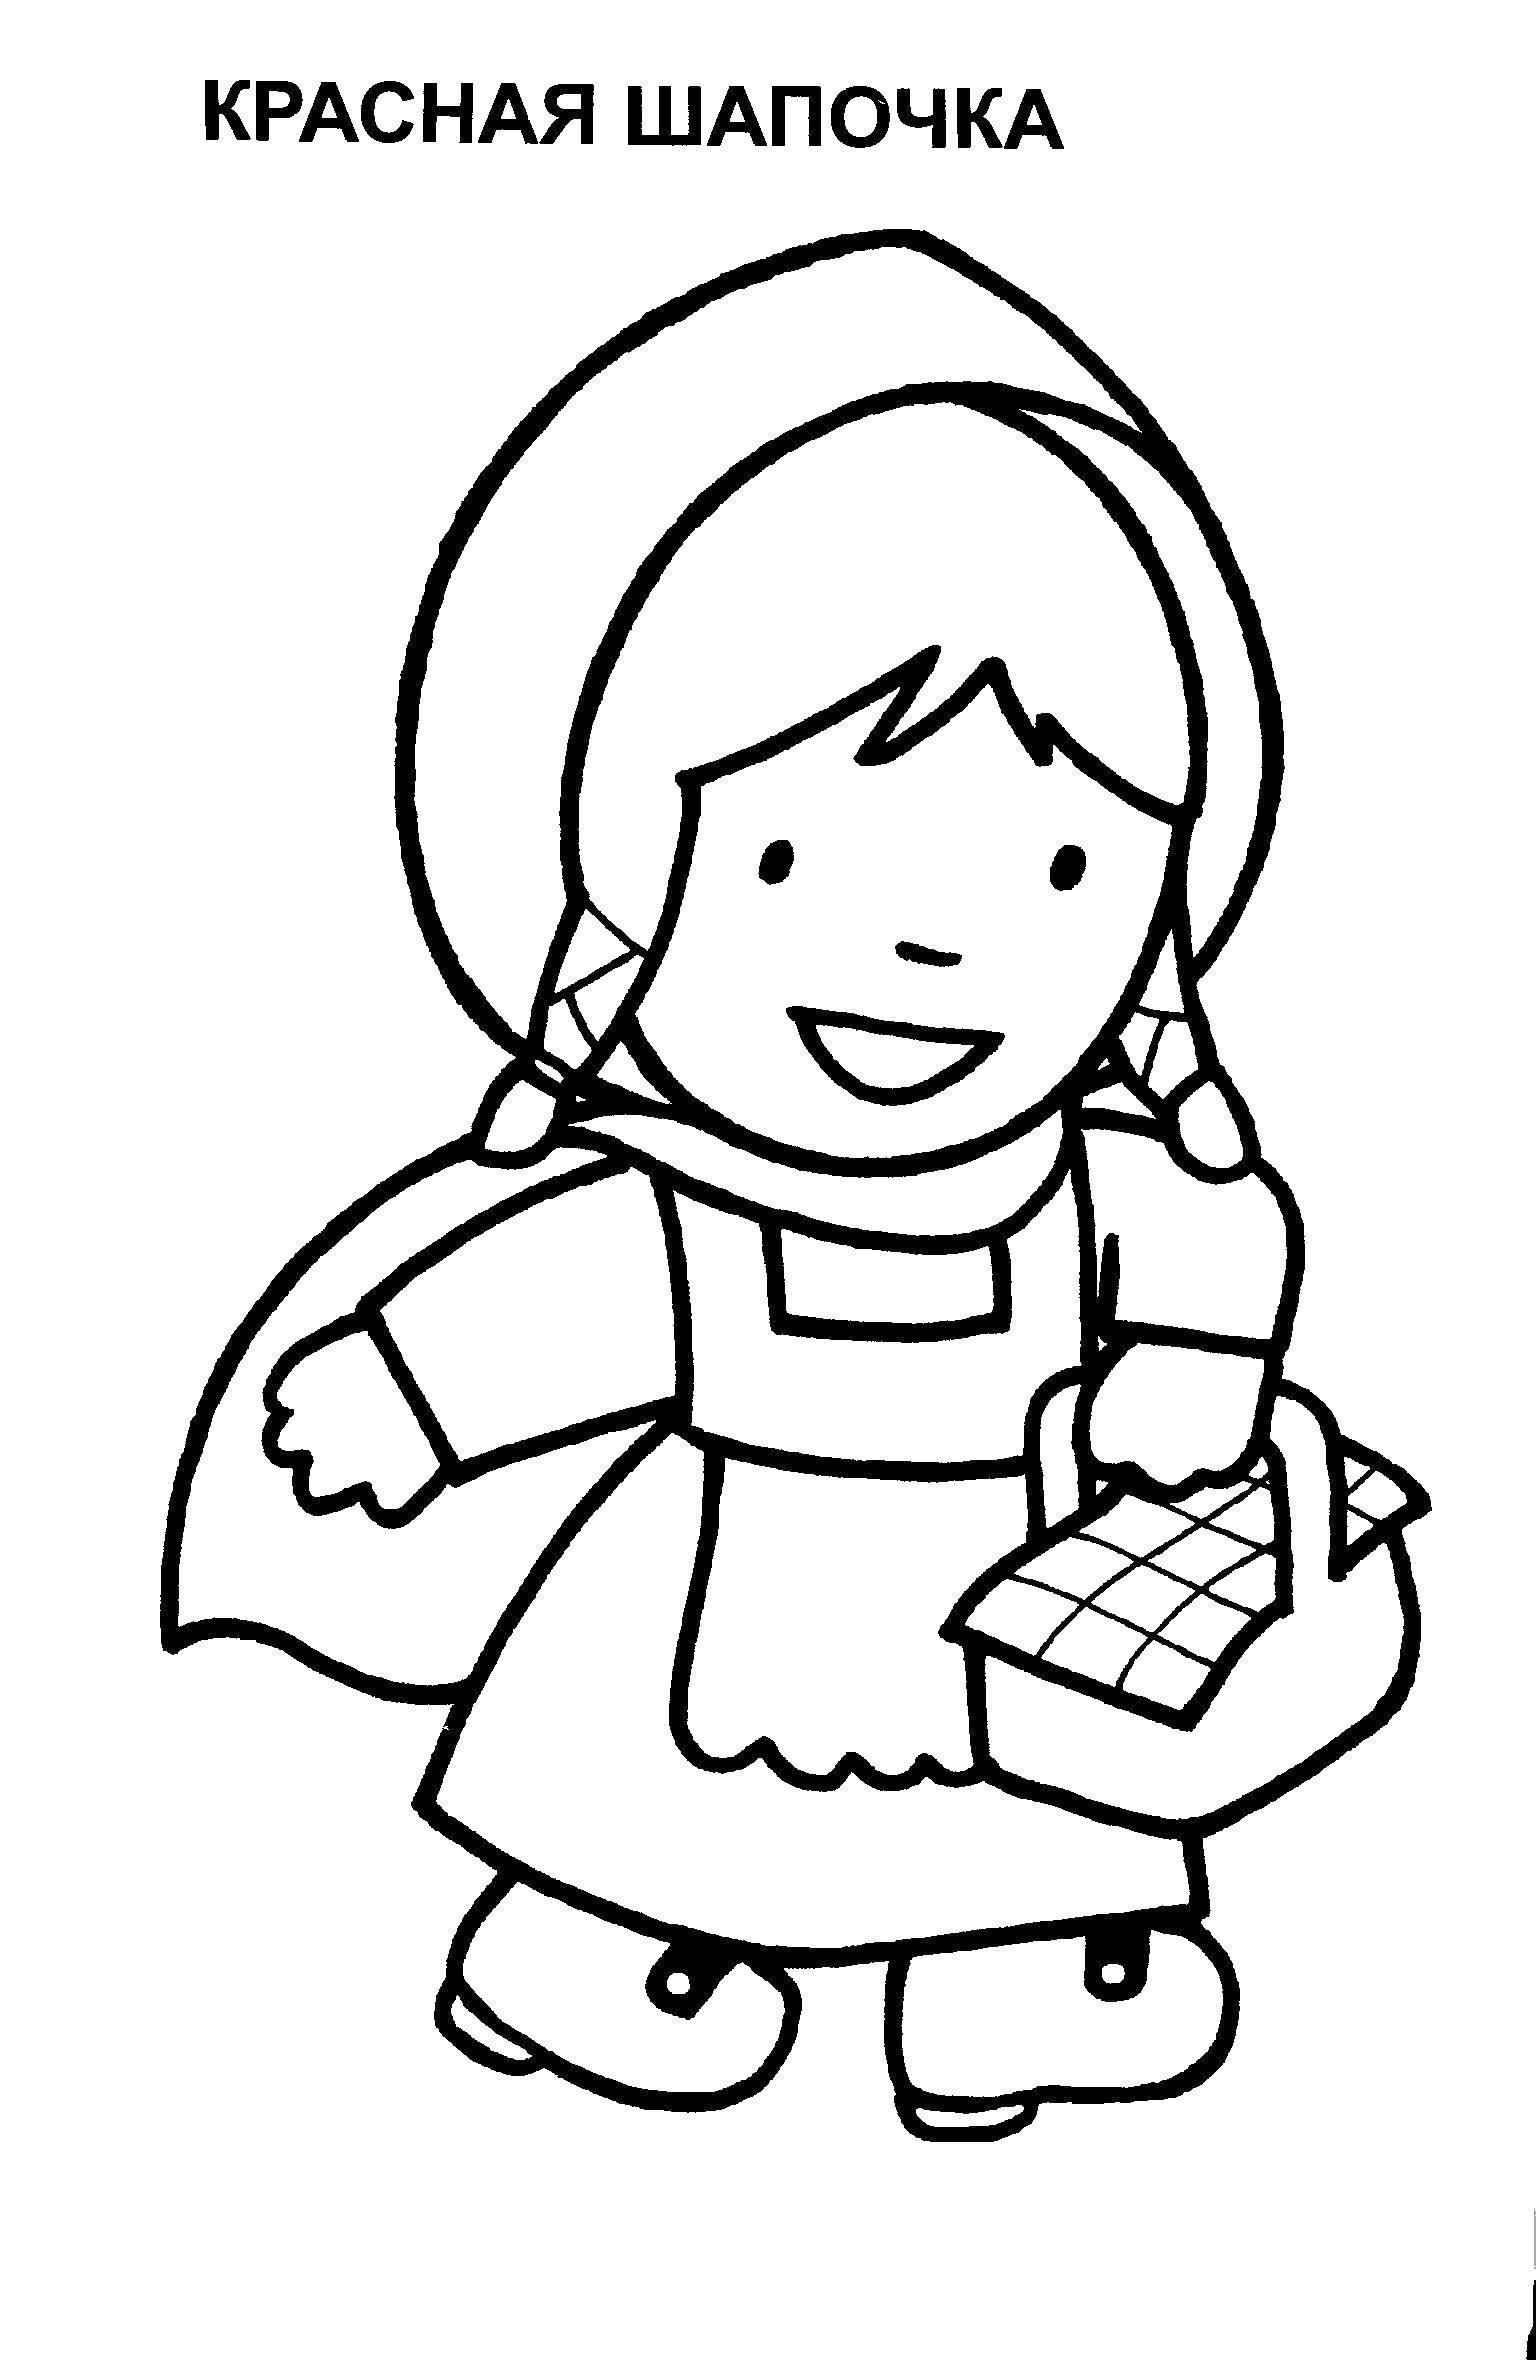 Coloring Little red riding hood. Category Coloring pages for kids. Tags:  red riding hood.